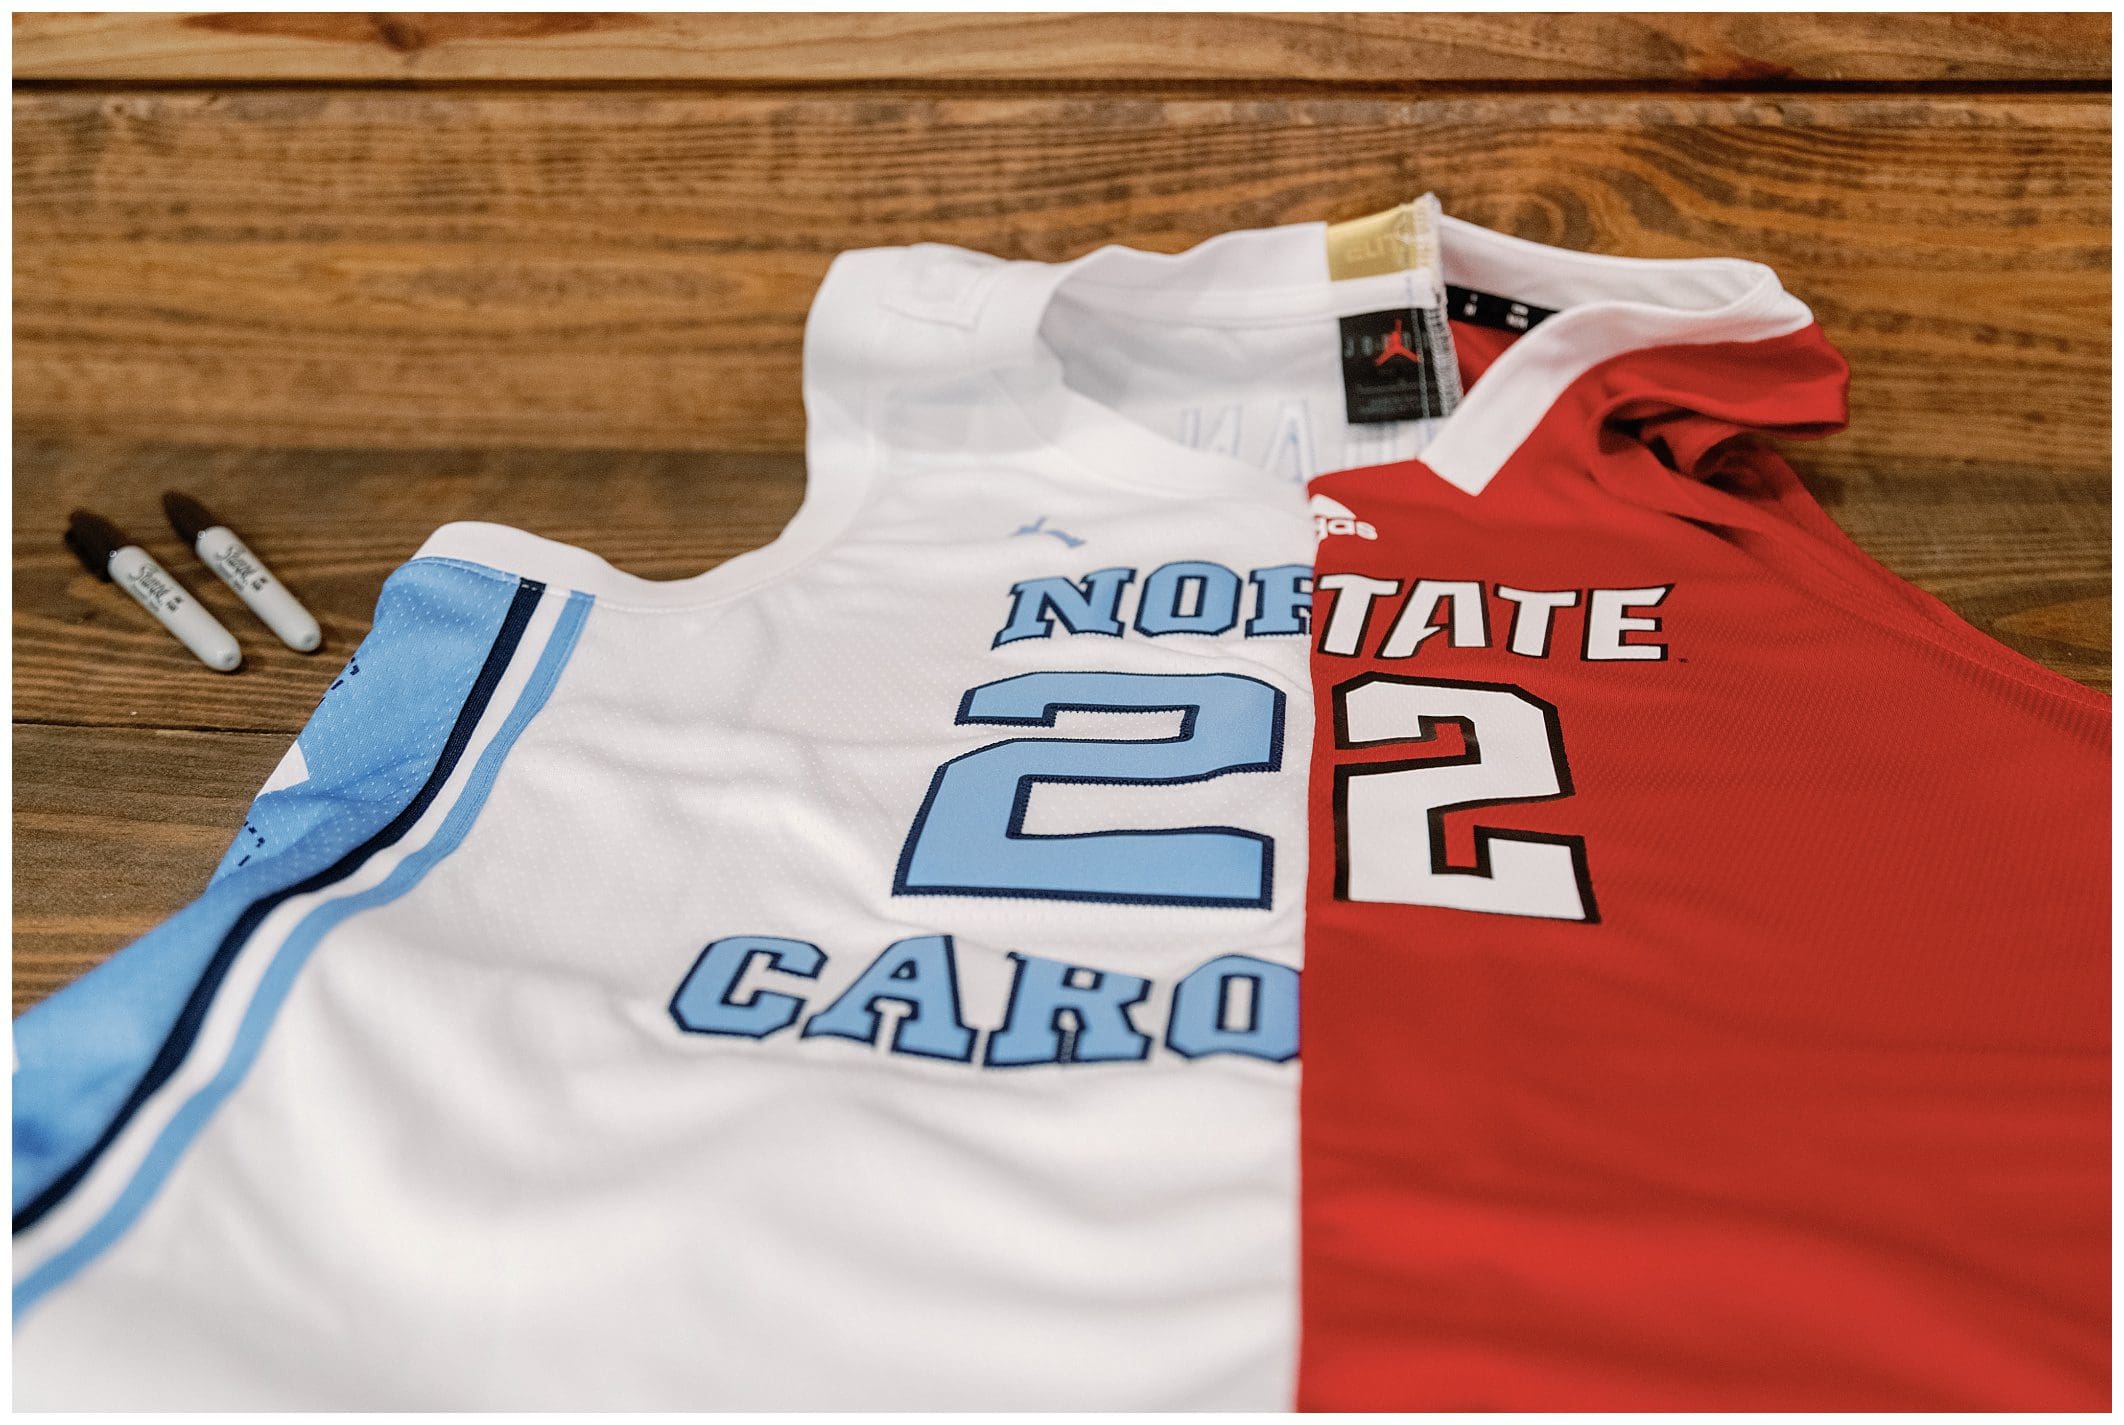 Two basketball jerseys, one white with "north carolina" and the other red with "state," laid on a wooden surface with markers beside them.